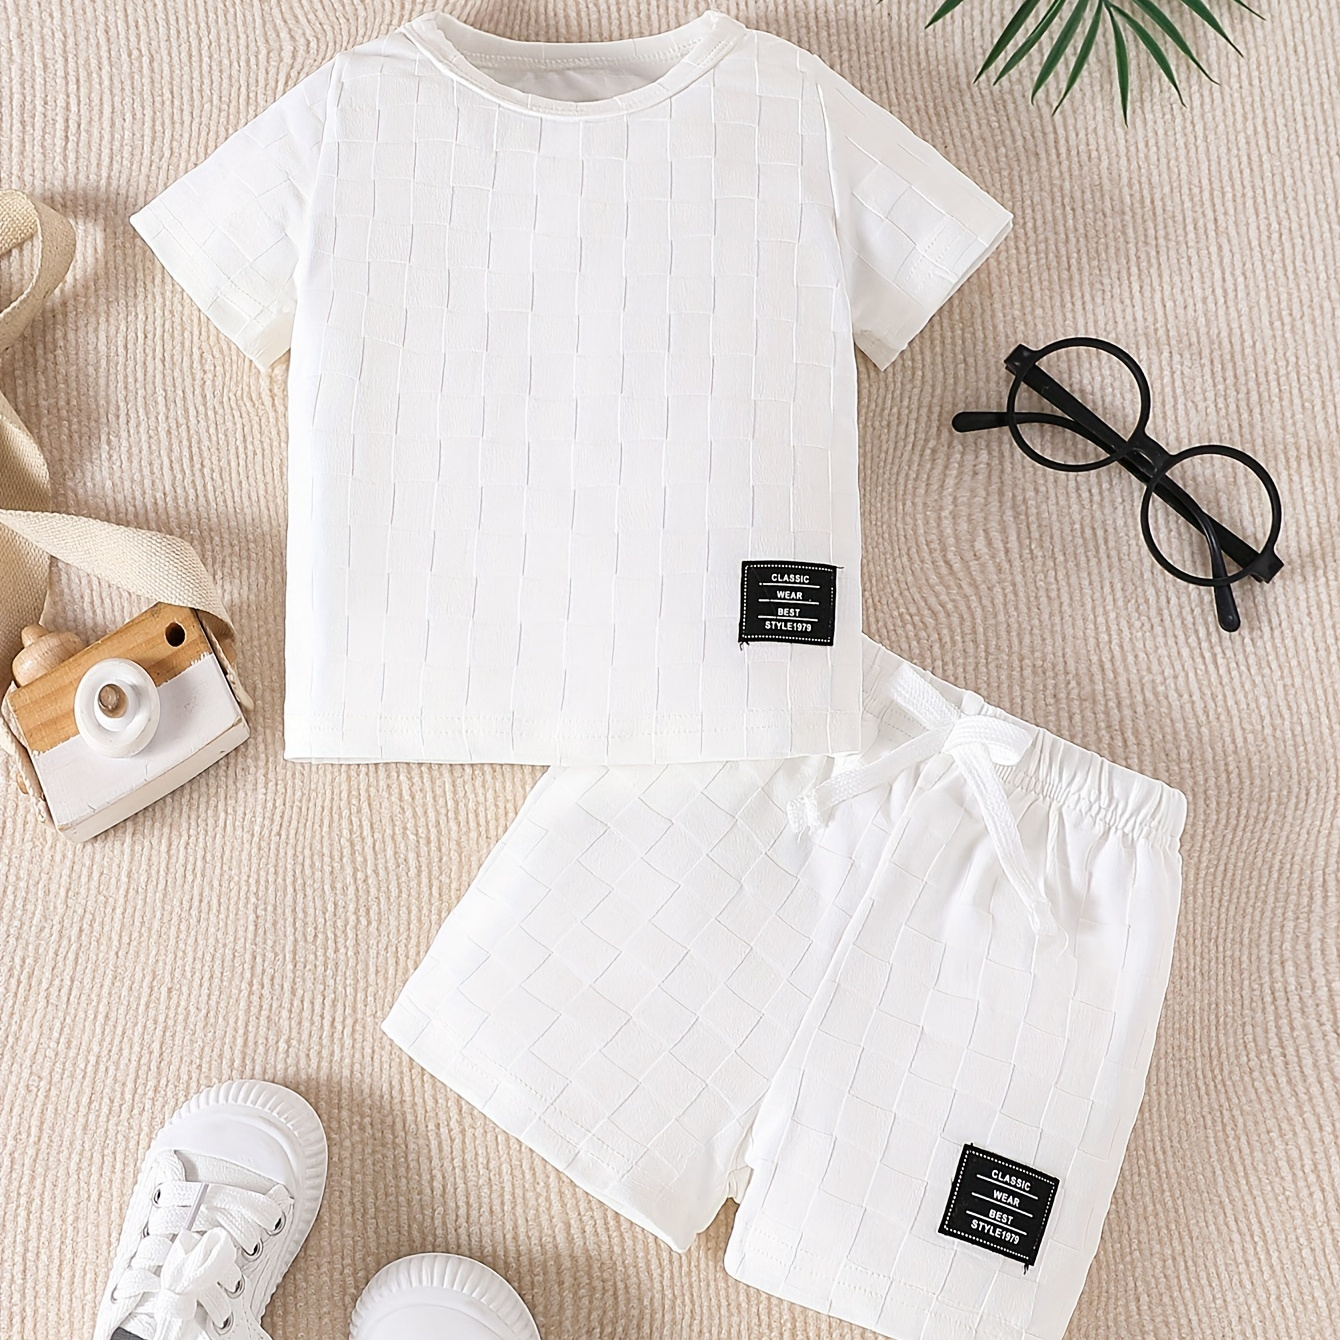 

2-piece Baby Unisex White Set, Casual Textured Checkered Fabric, White T-shirt And Shorts Outfit For Boys And Girls